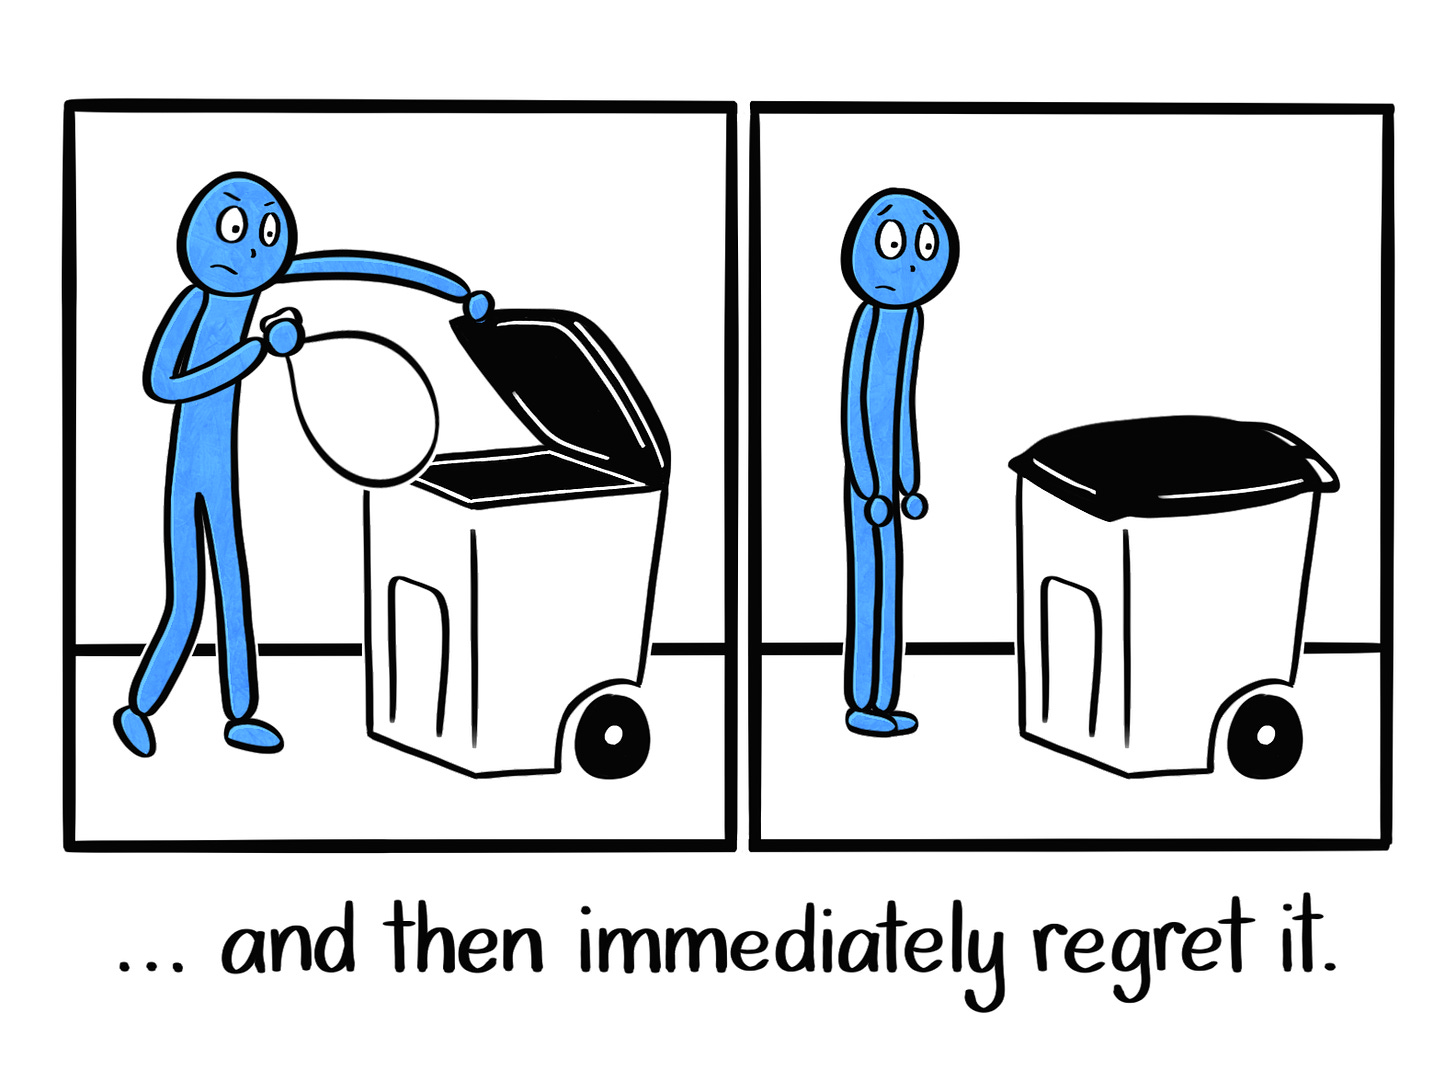 Caption: ... and then immediately regret it. Image: Two panels, the first showing the angry Blue Person throwing the trash bag in the garbage bin. The second shows the Blue Person looking at the bin in regret. 